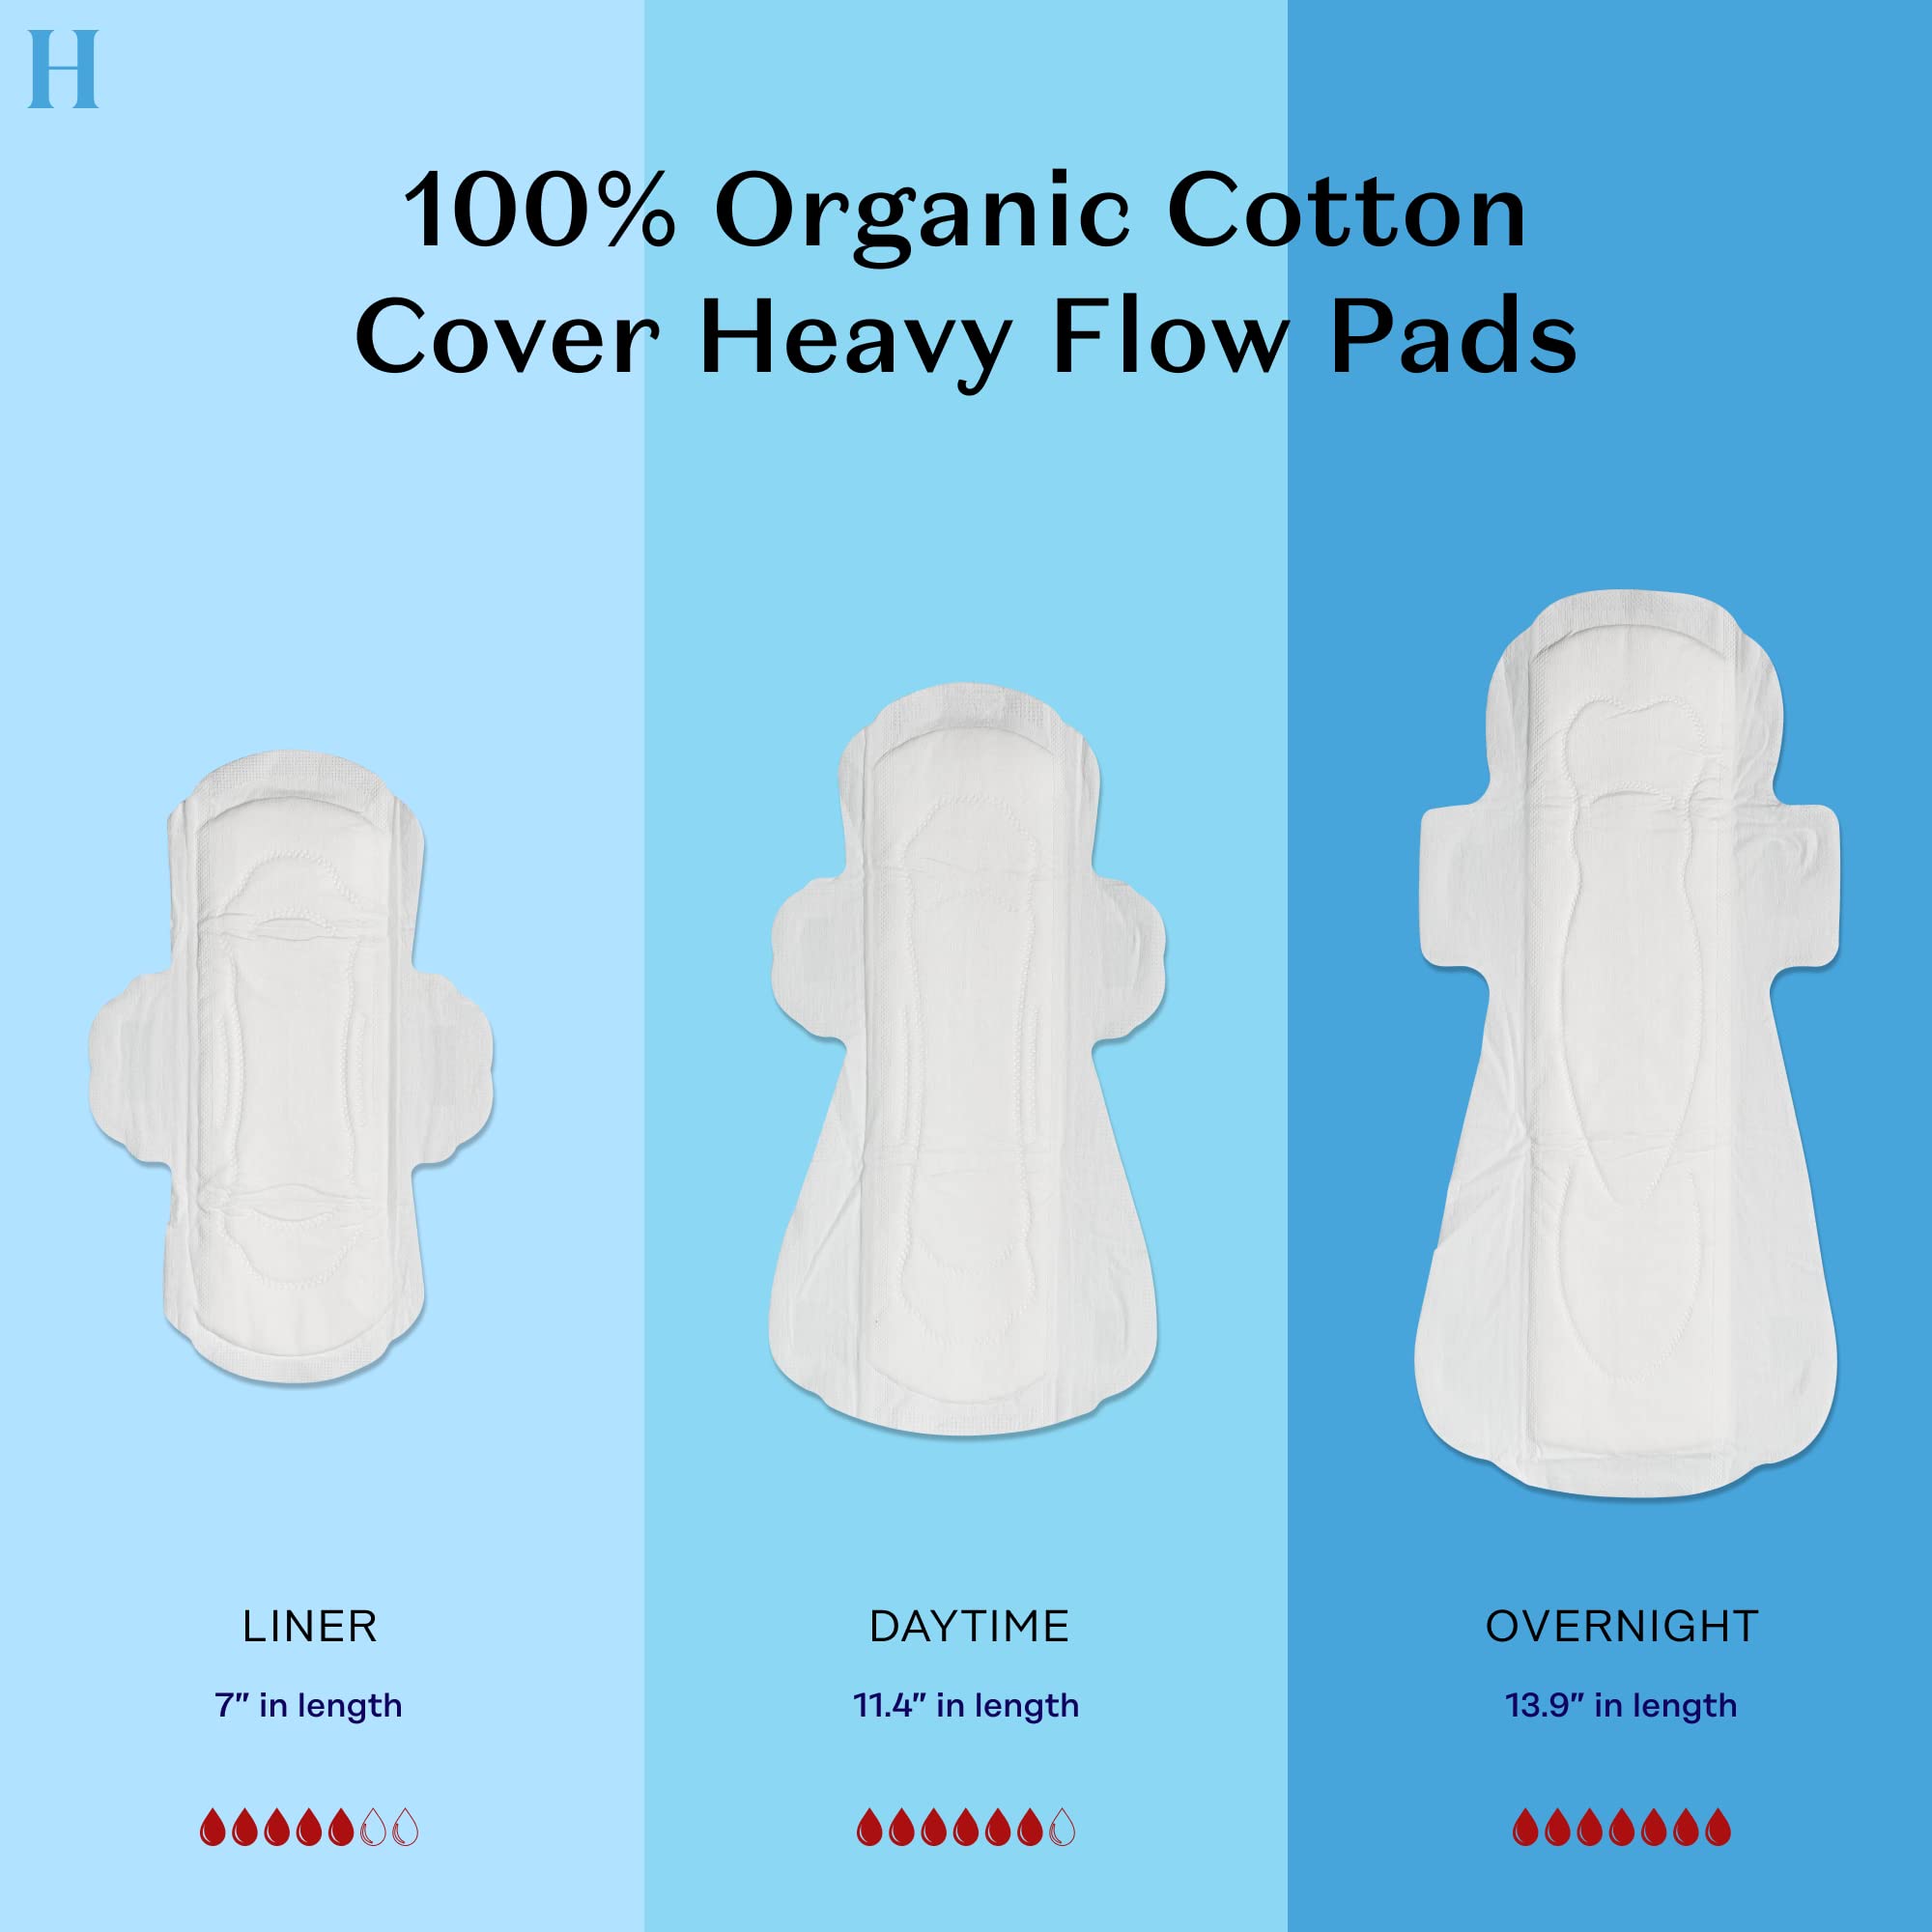 The Honey Pot Company - Overnight Heavy Flow Pads with Wings. Infused w/Essential Oils for Cooling Effect, Organic Cotton Cover, and Ultra-Absorbent Pulp Core. 20 ct.